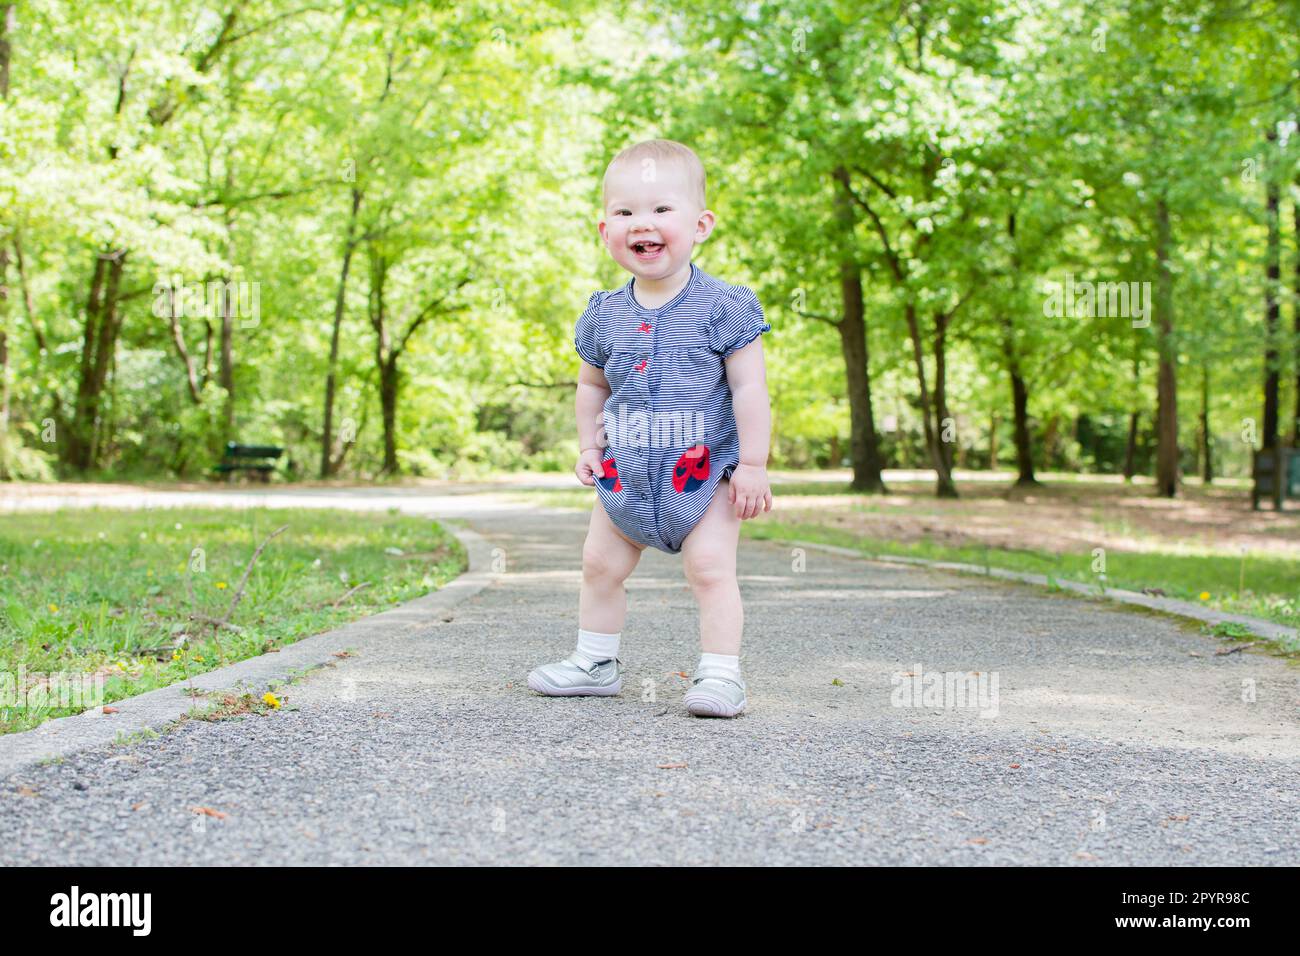 A Toddler is taking her first steps in the park. Baby is learning how to walk. Baby development 1-year-old girl Stock Photo